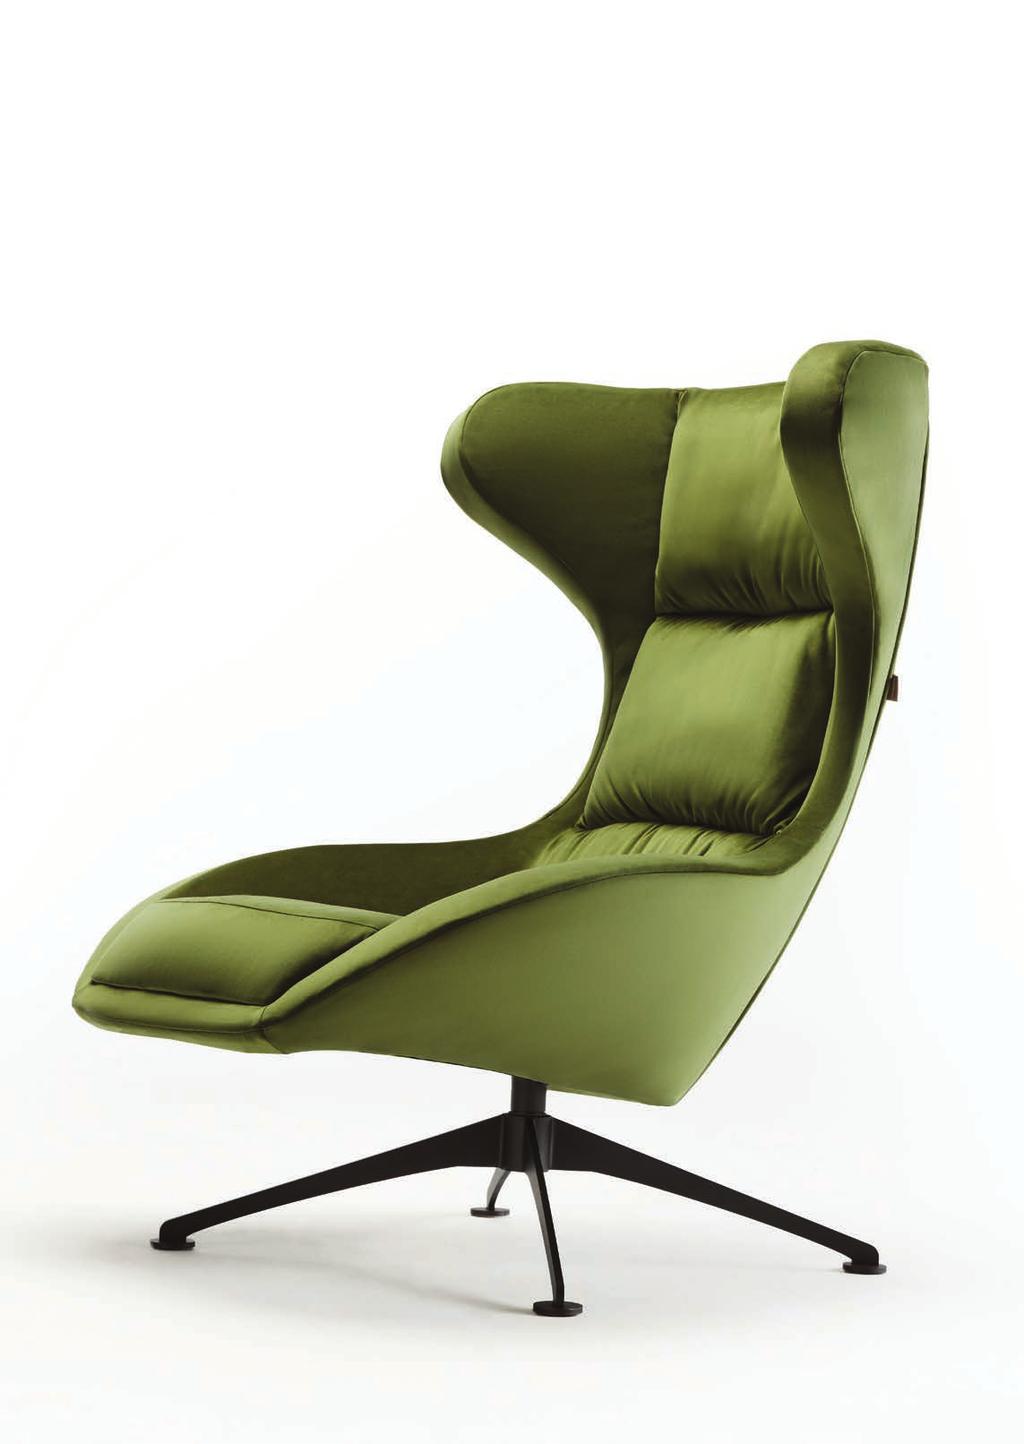 nova design by George Ververidis High standard comfort with a dynamic design that greets the body offering an upgraded